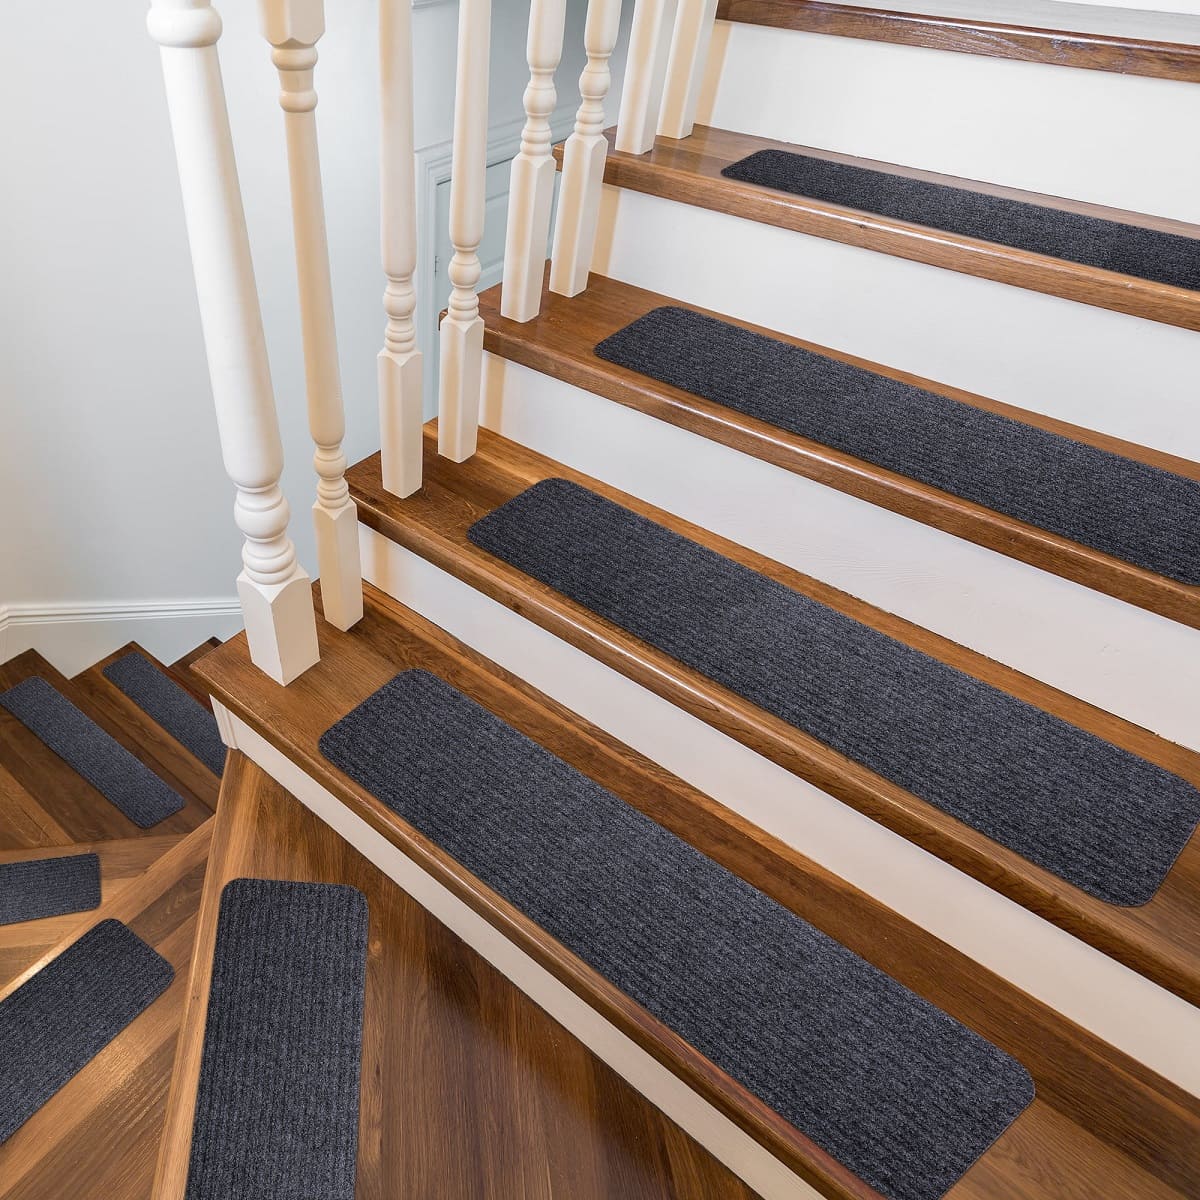 What To Put On Stairs Instead Of Carpet